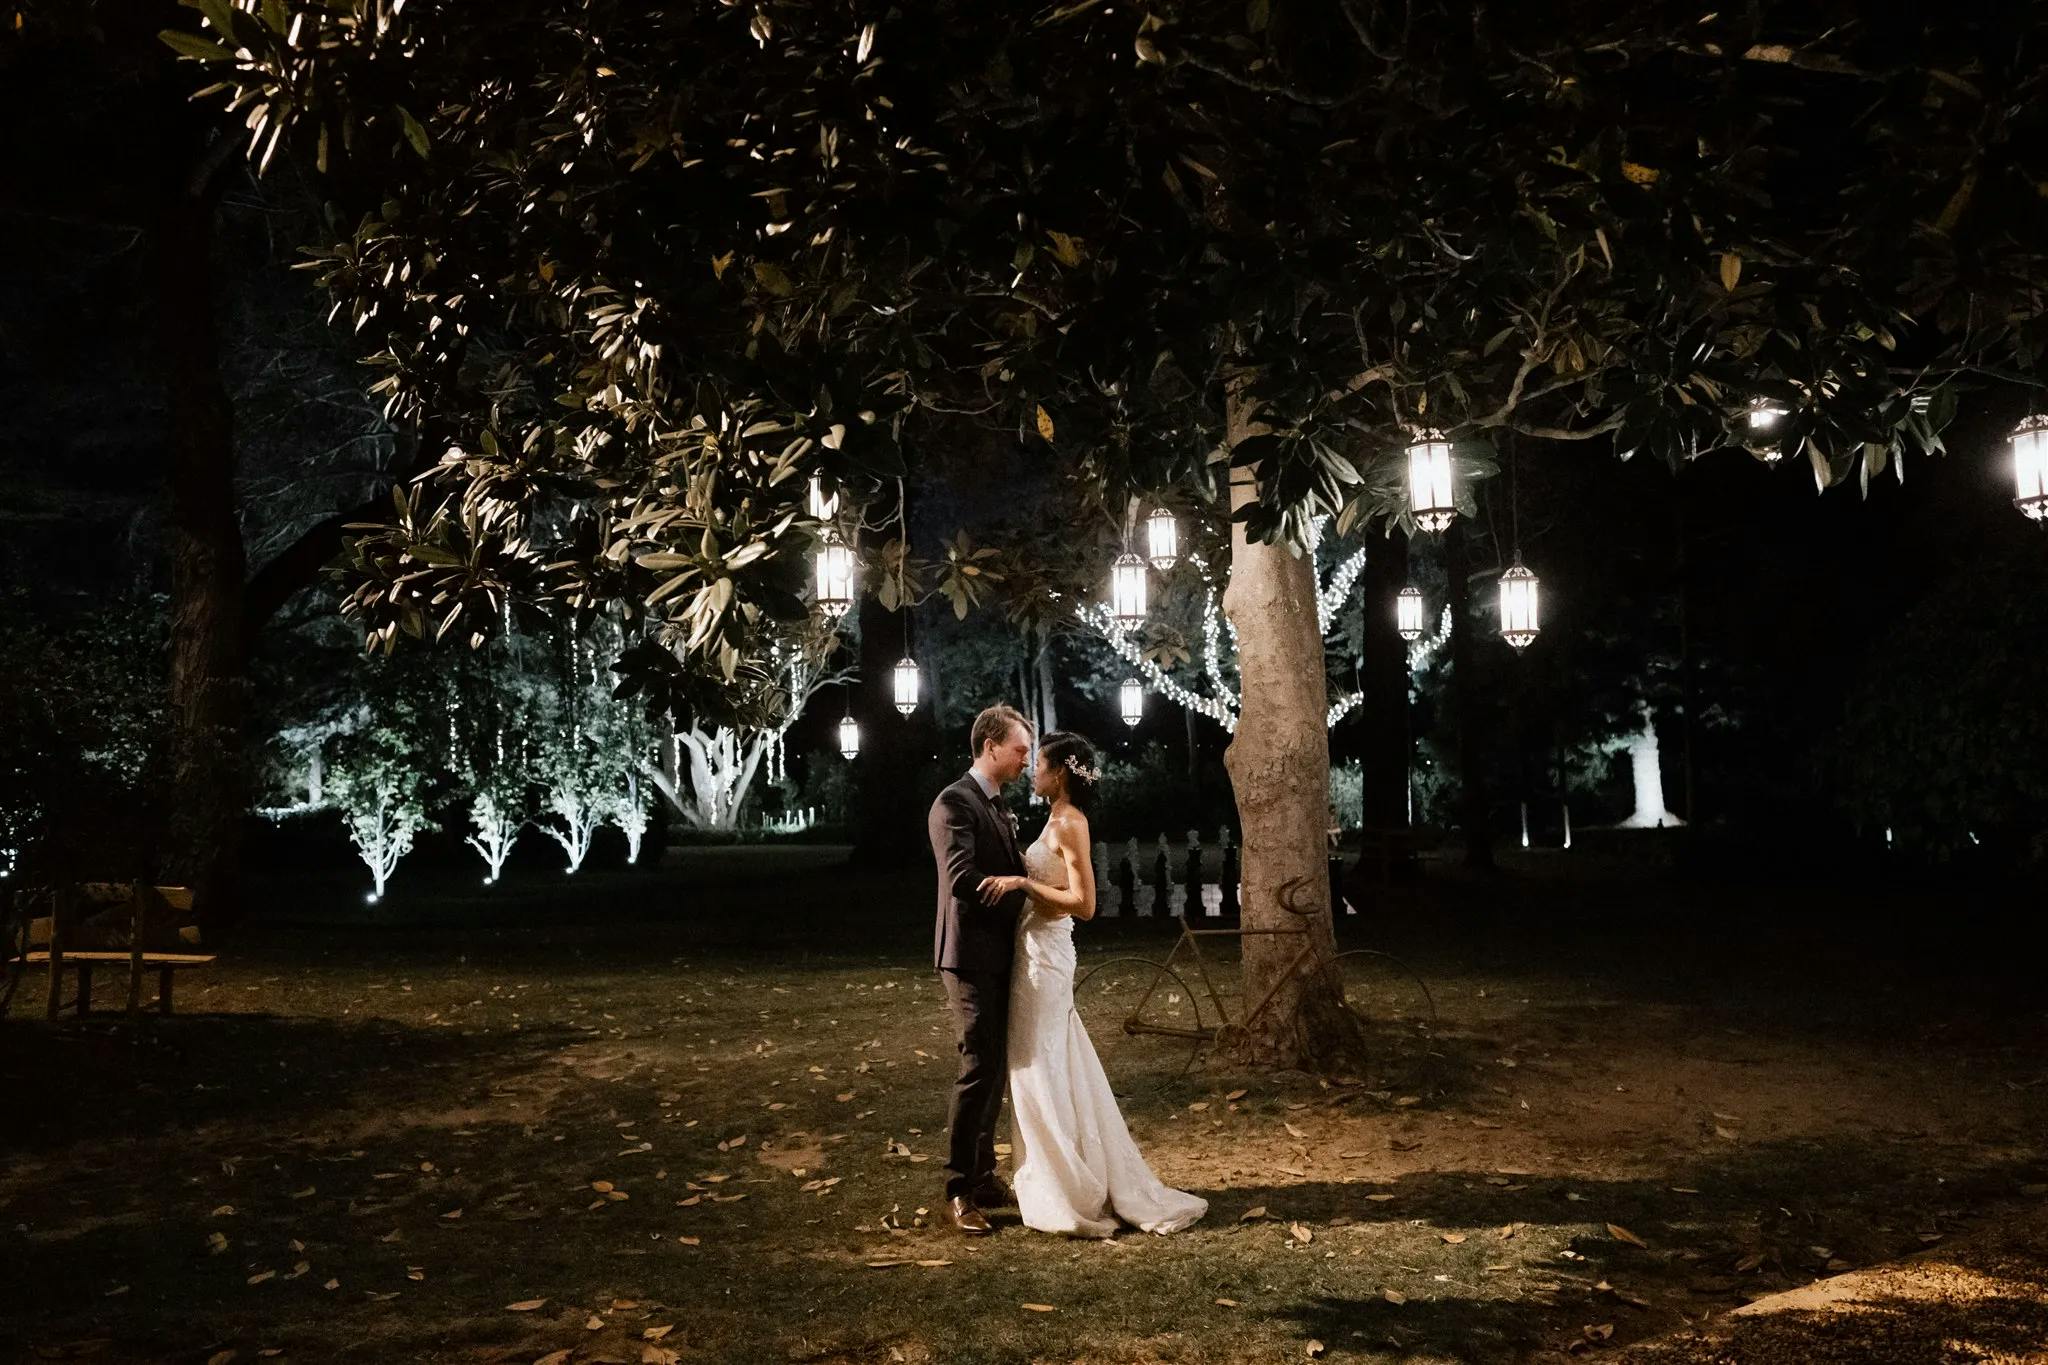 A bride and groom embrace under a large tree adorned with hanging lanterns at night. The scene is romantically lit, highlighting the couple and casting gentle shadows on the ground. The background features softly illuminated trees and foliage.